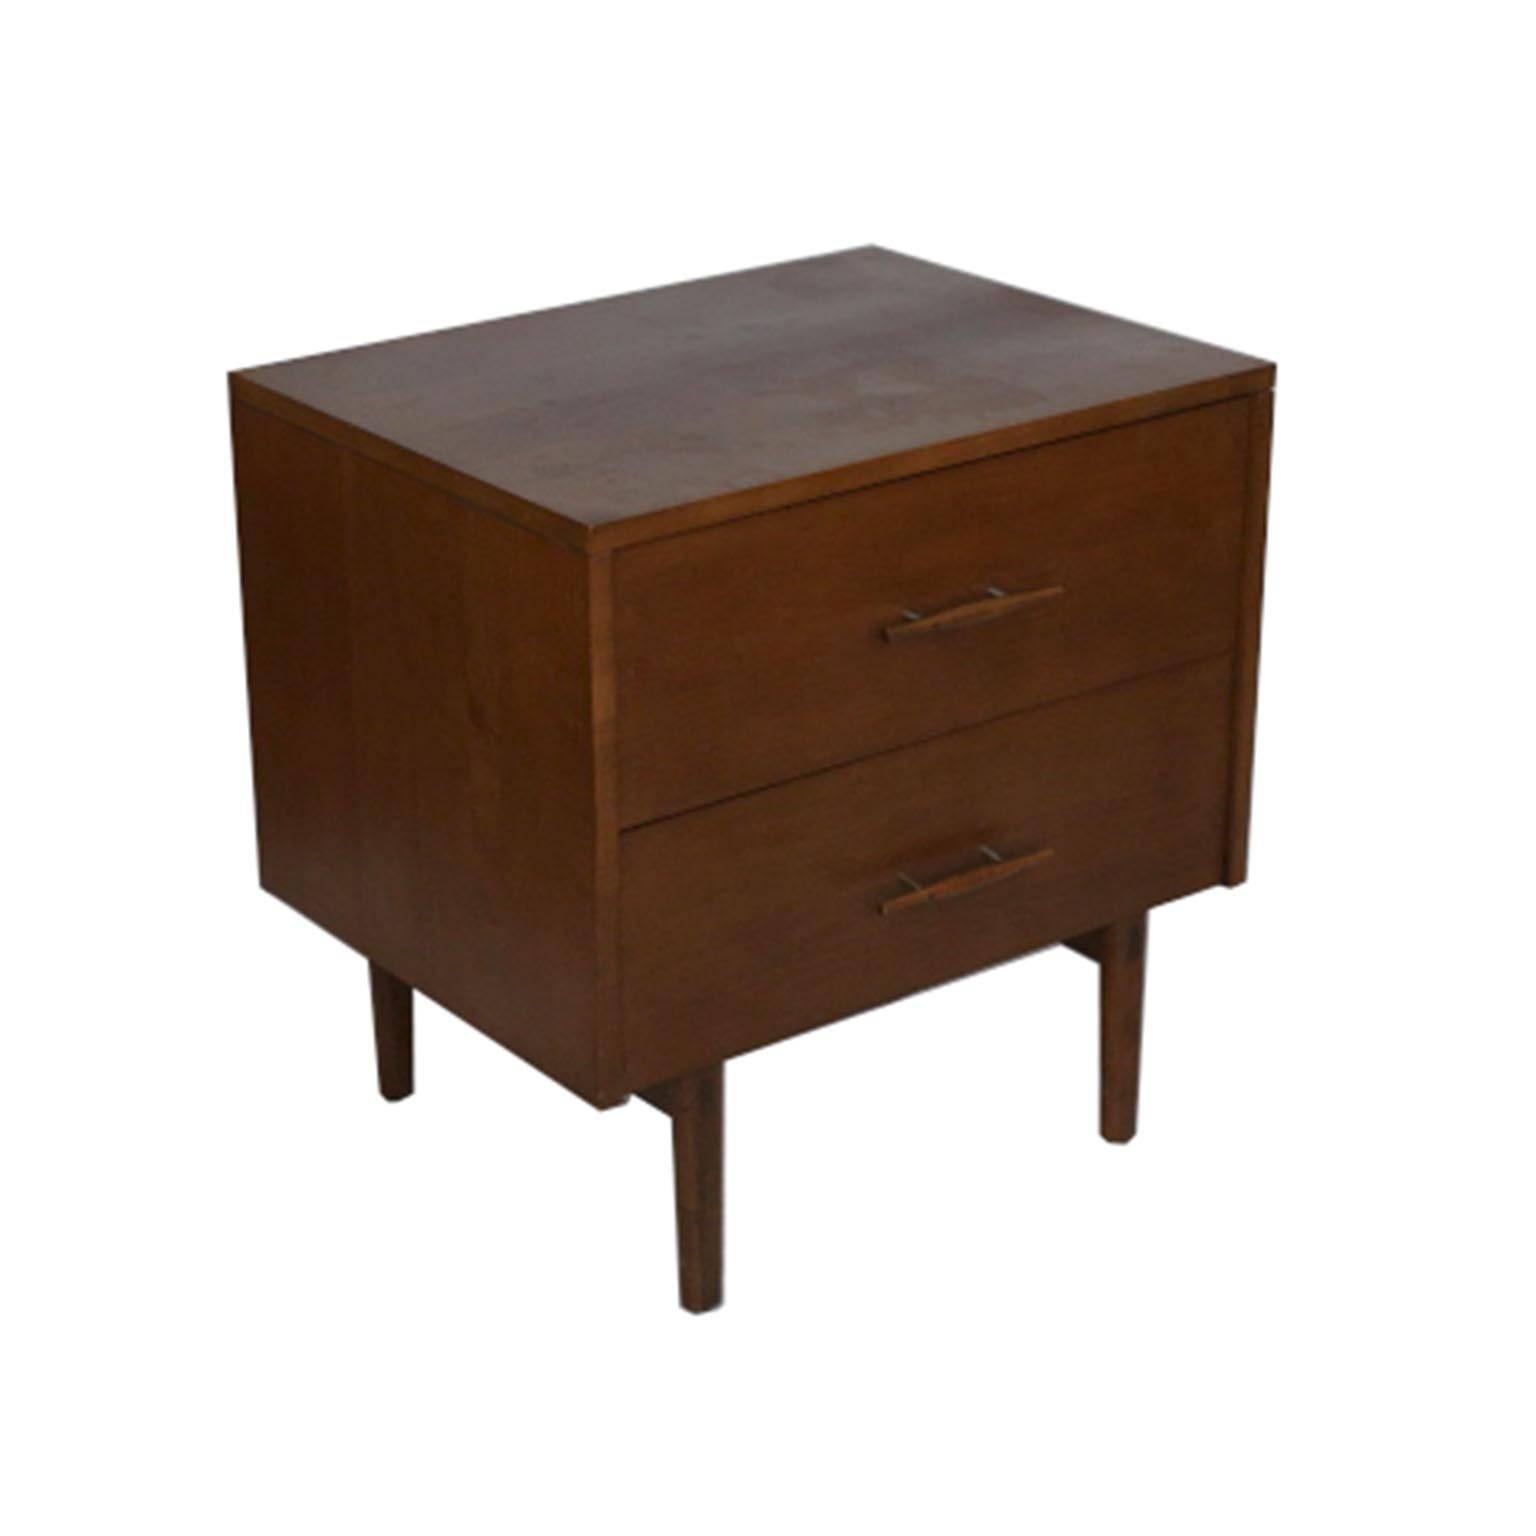 Two-drawer teak Paul McCobb for Planner Group with beautiful inlaid handles.
Please see matching dresser on S16 Home site. 
Â Â Â Â 